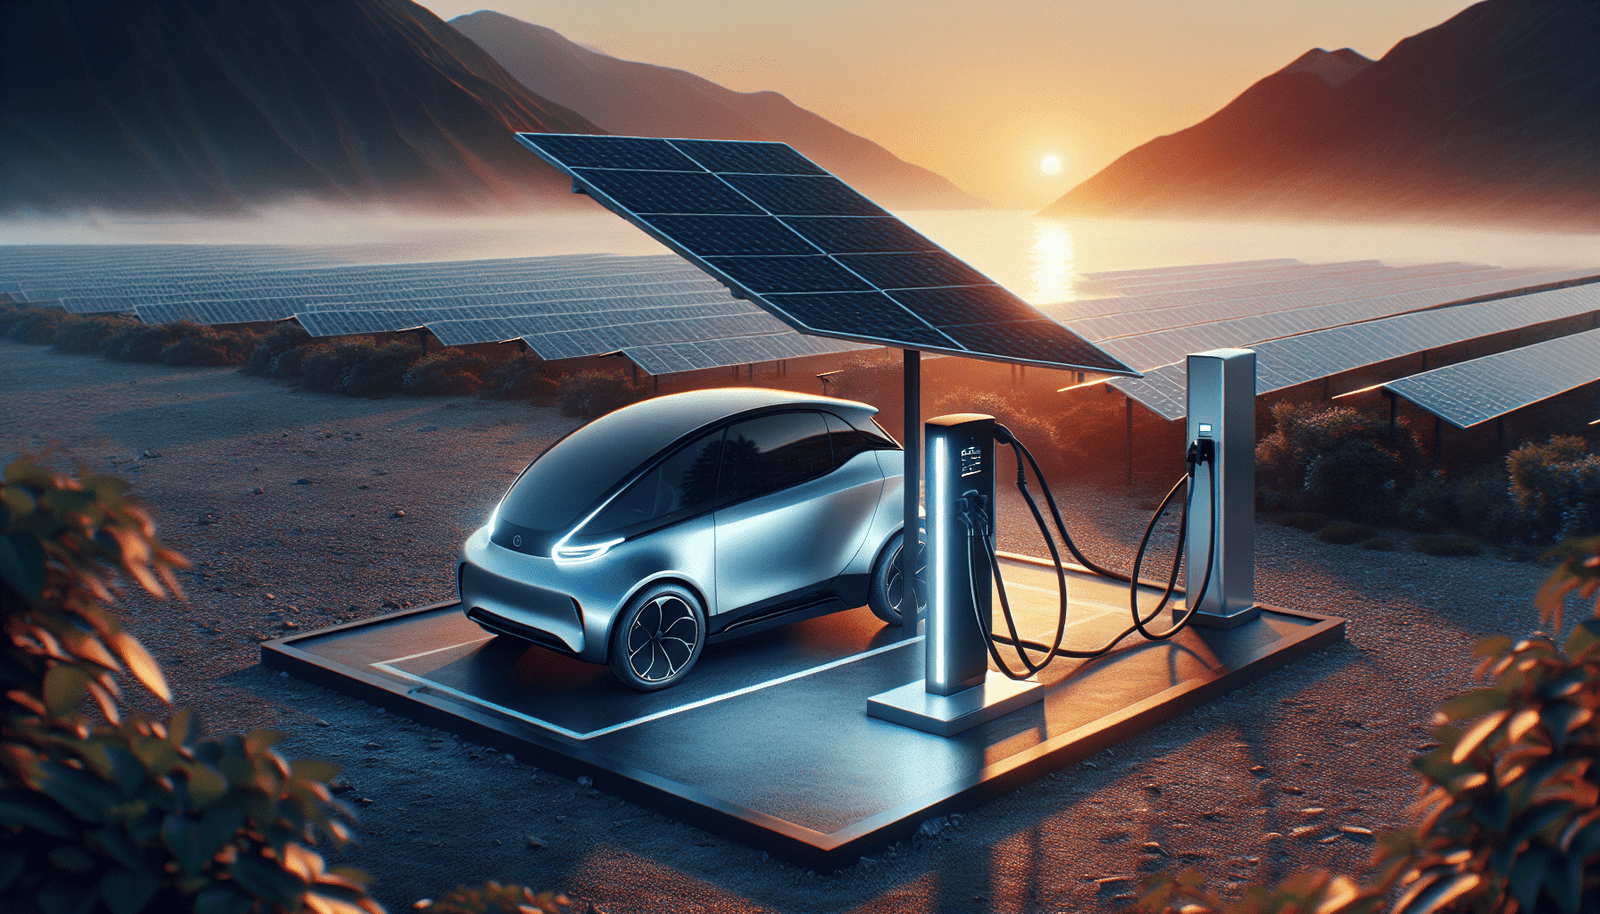 How Is Solar Charging Technology Being Incorporated Into EVs?